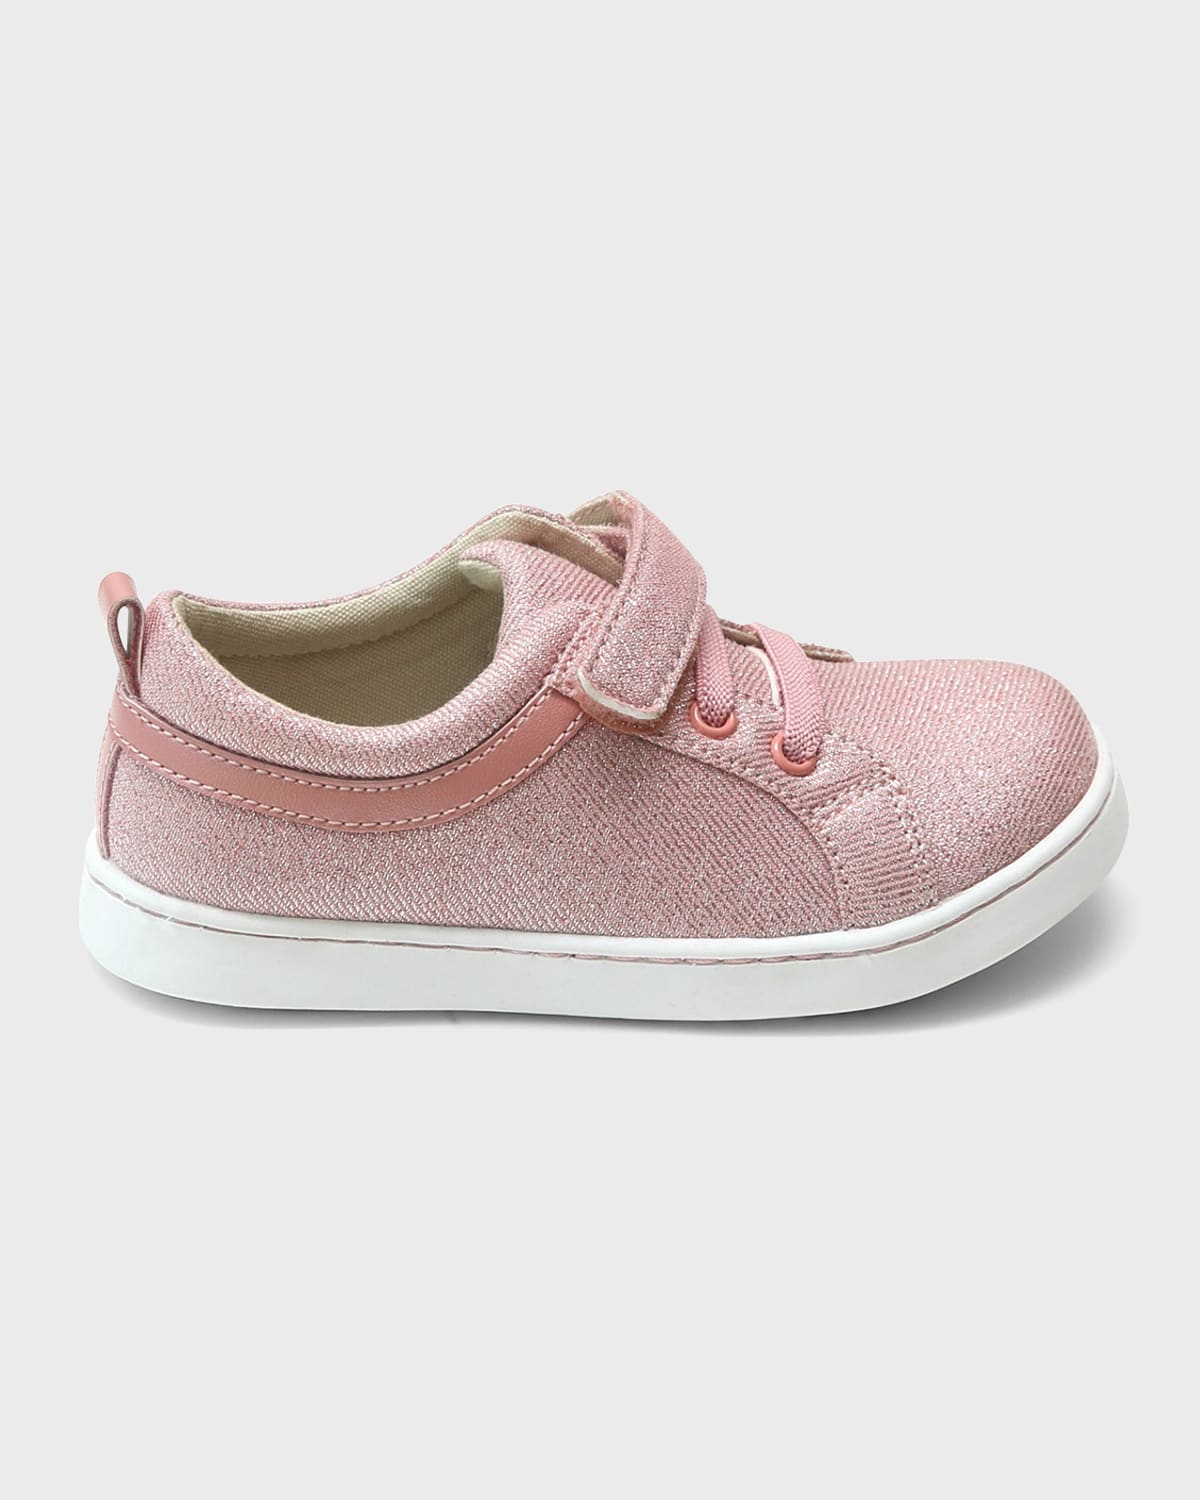 L'amour Shoes Girl's Natalie Metallic Sneakers, Baby/toddlers/kids In Pink